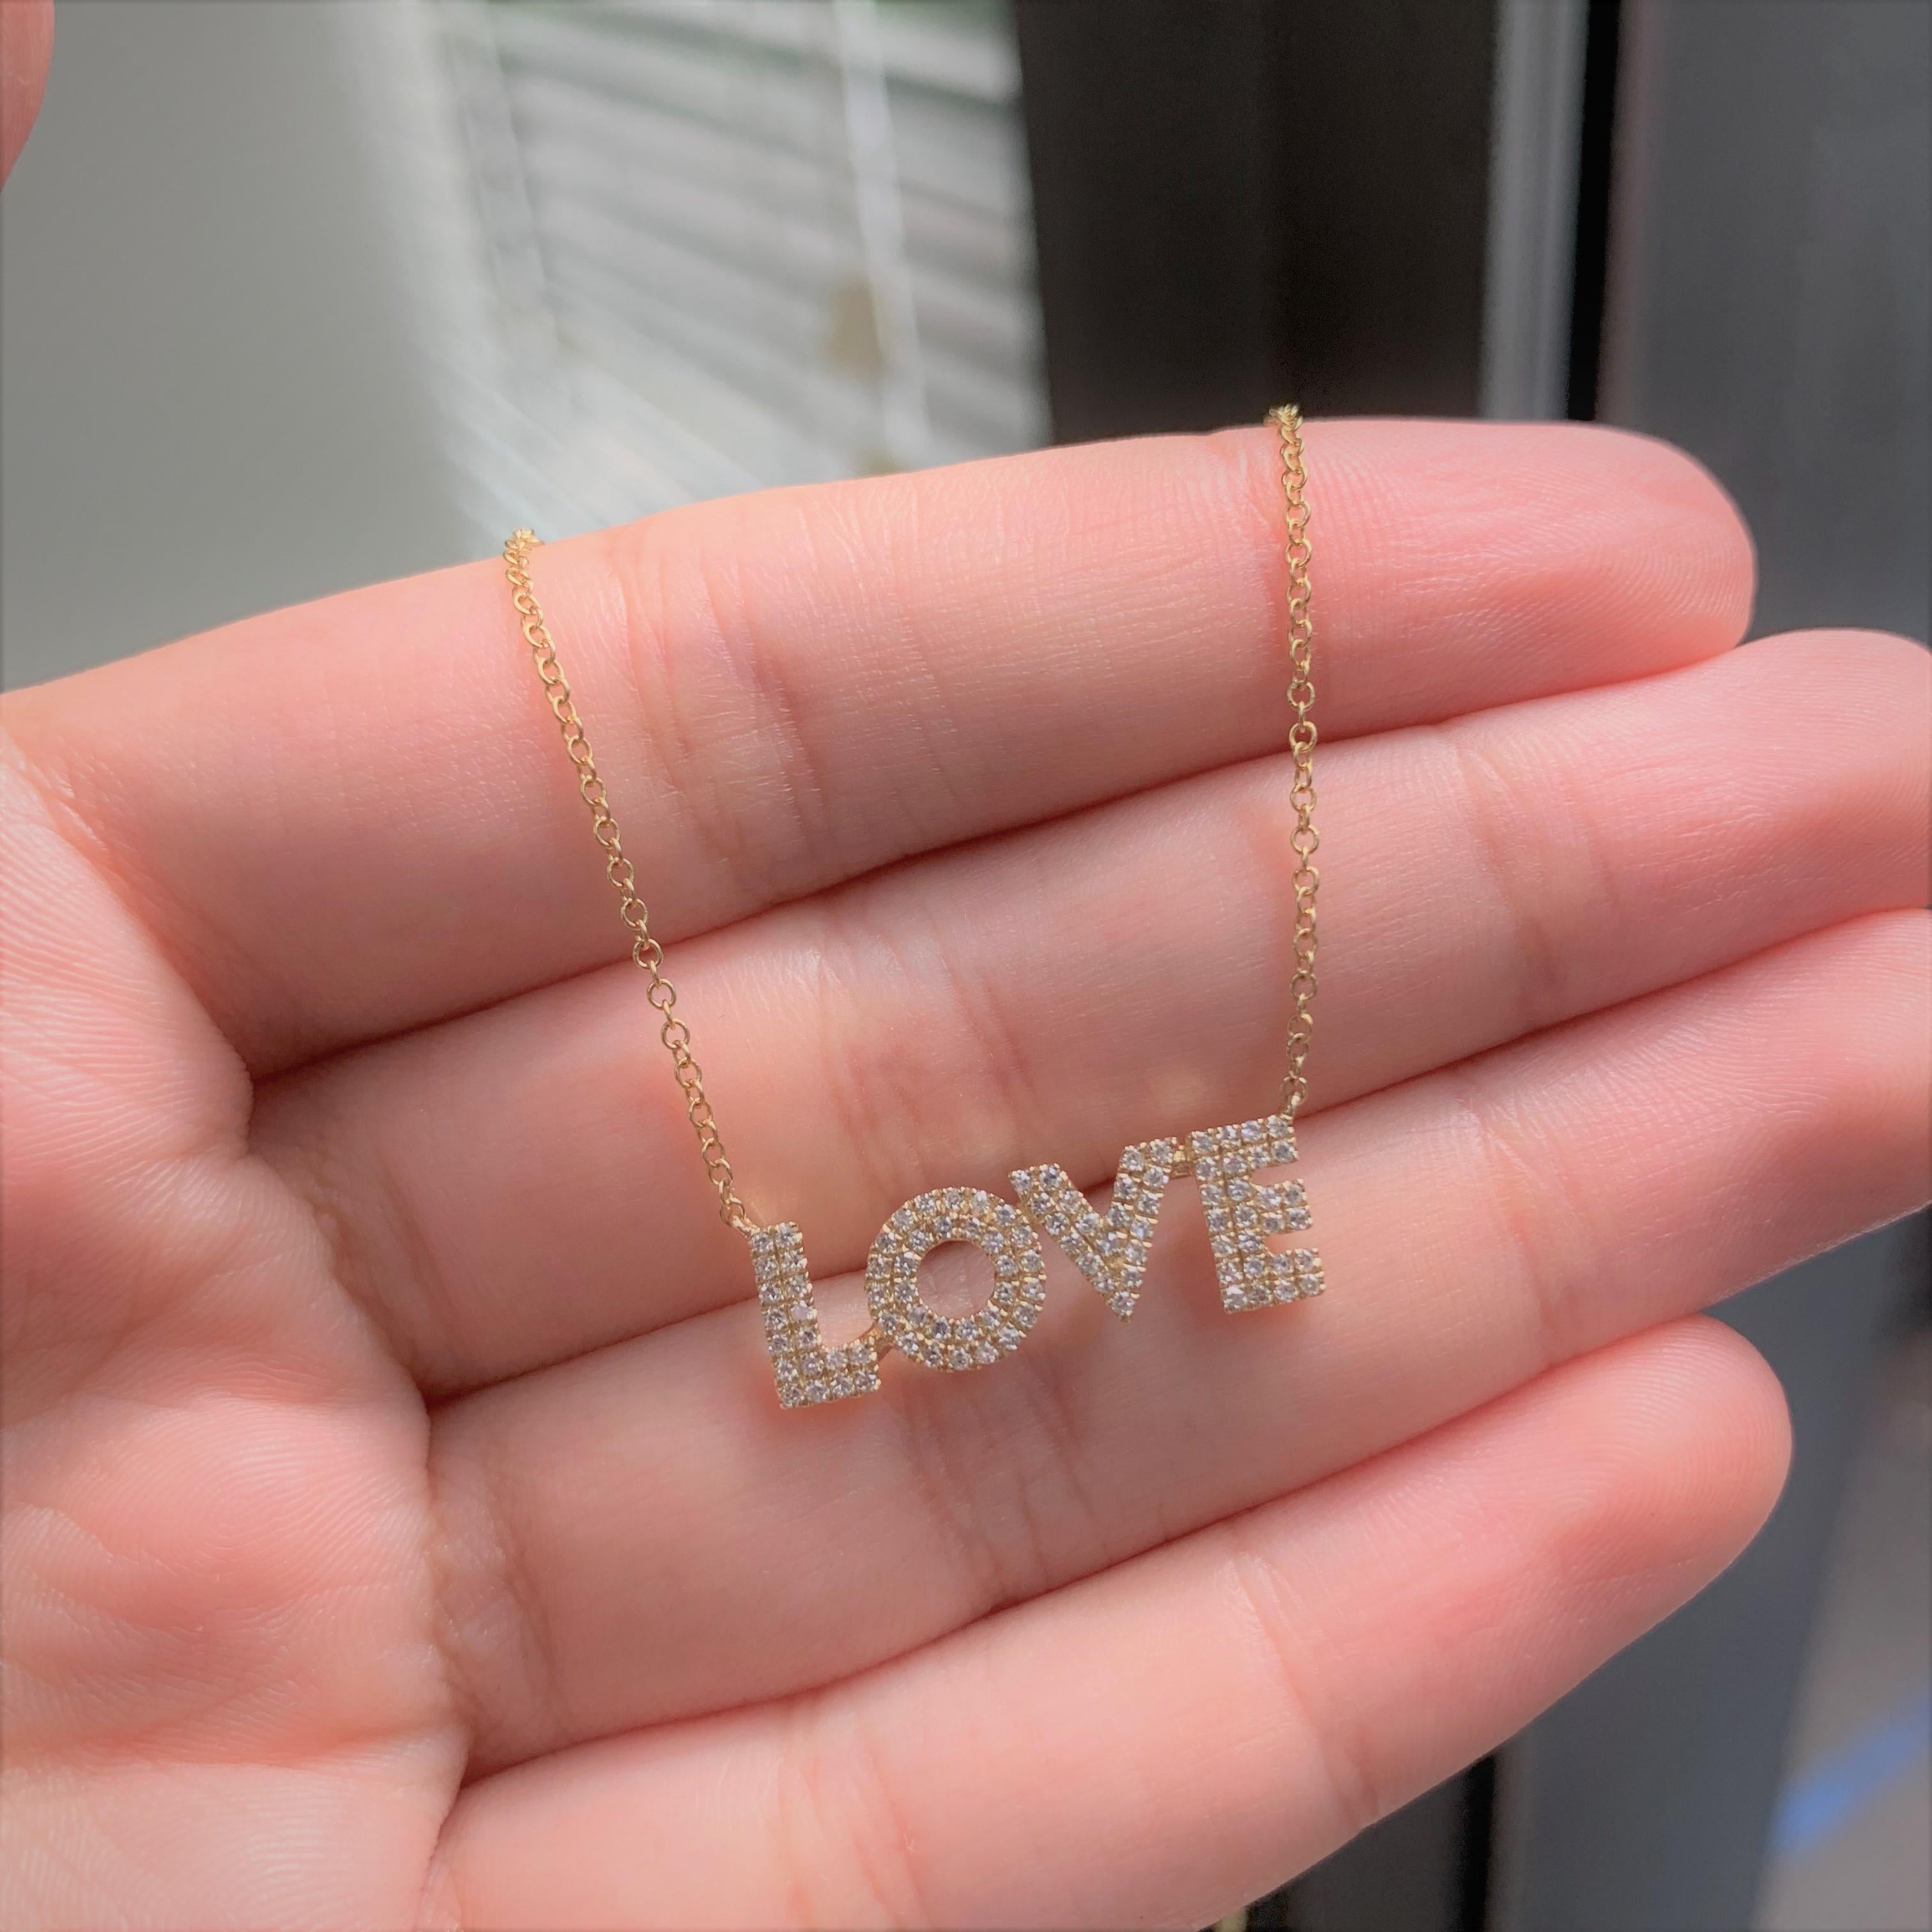 This Beautiful LOVE Necklace adds the perfect touch to your look! Crafted of 14K Gold this necklace features 0.27 carats of Round natural White Diamonds, on an adjustable 16